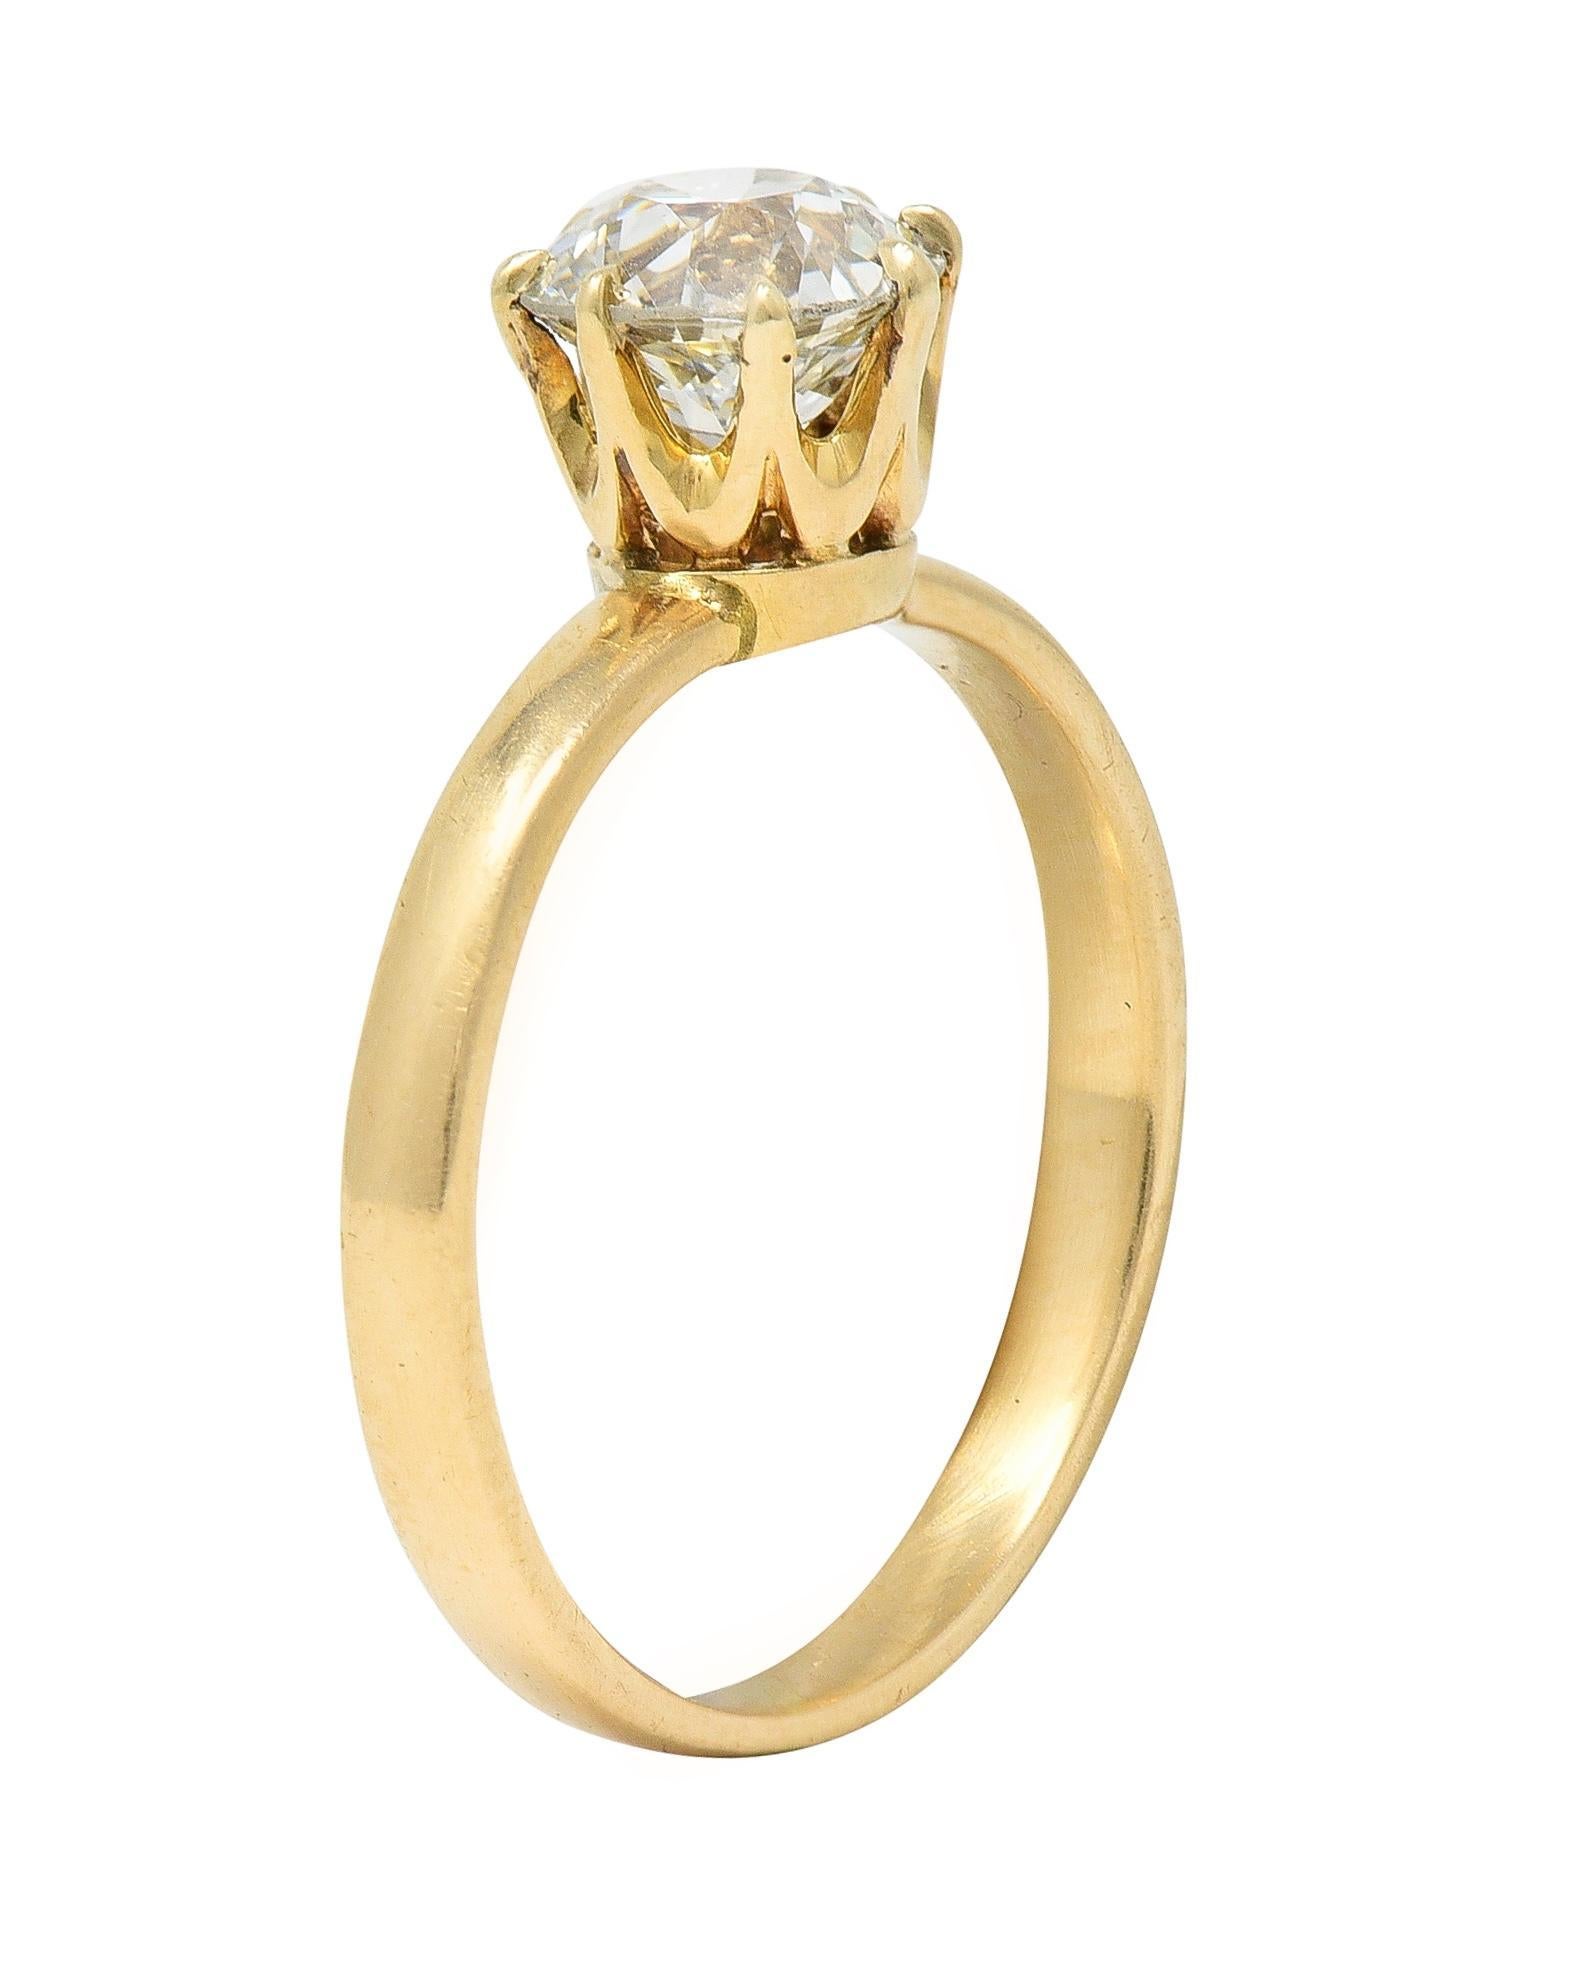 Centering an old European cut diamond weighing approximately 1.00 carat - J color with VS2 clarity
Set in a six-pronged mount with a pierced profile 
Completed by high polish shank 
Stamped for 14 karat gold
Circa: 1880s
Ring size: 5 and sizable